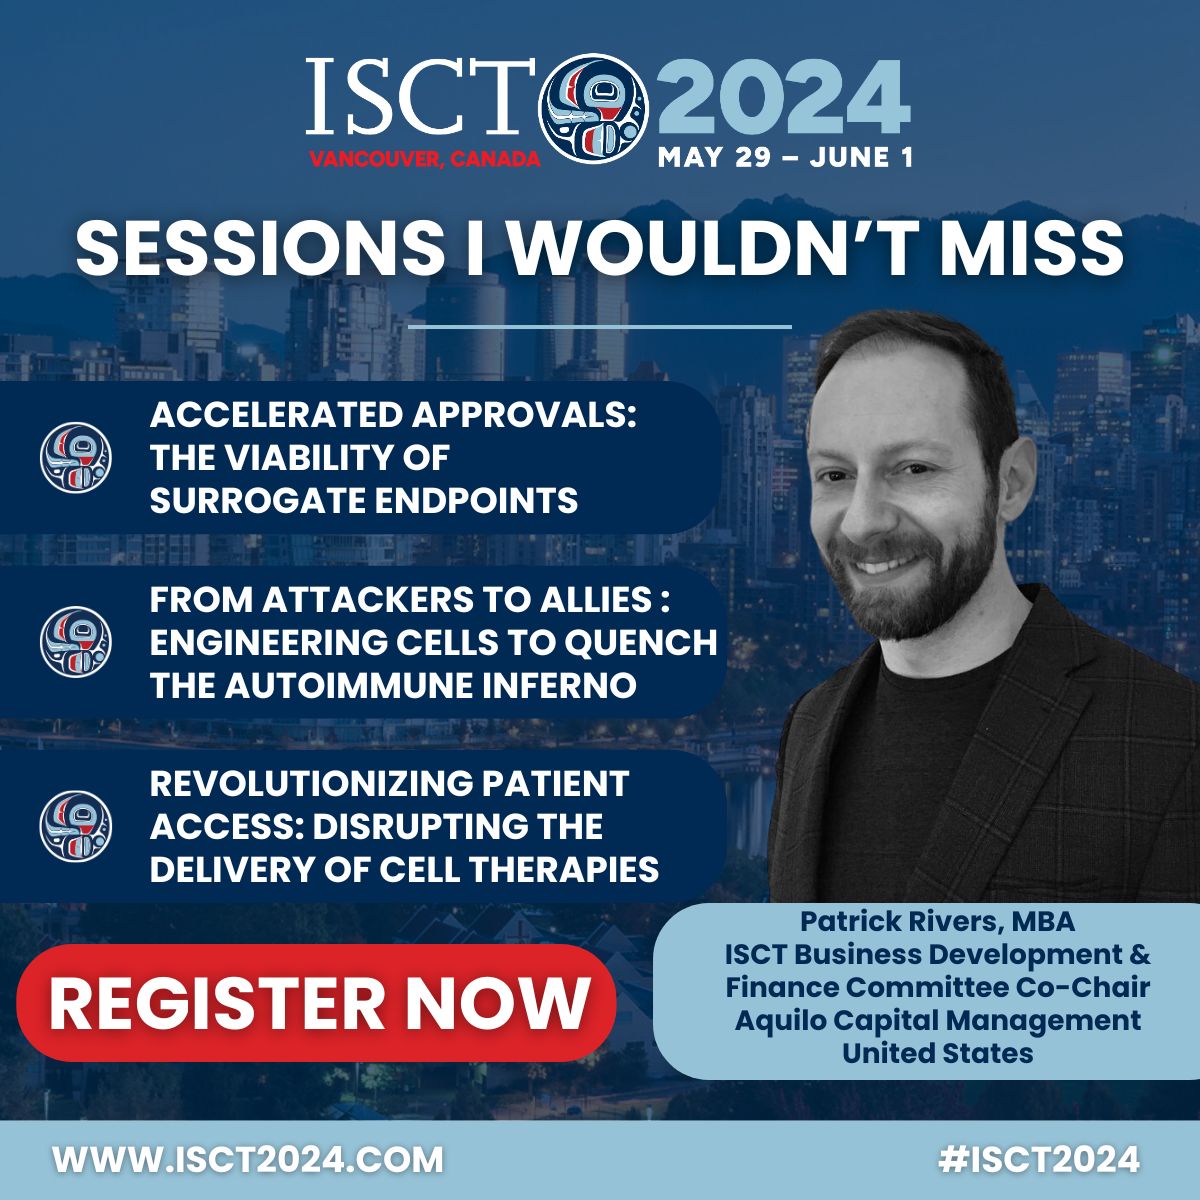 Don't miss these must-attend ISCT 2024 sessions picked by ISCT Business Development & Finance Committee Co-Chair, Patrick Rivers. Secure your spot at the premier cell and gene therapy event of the year. Register before May 9 for the best rate: buff.ly/484XMFT